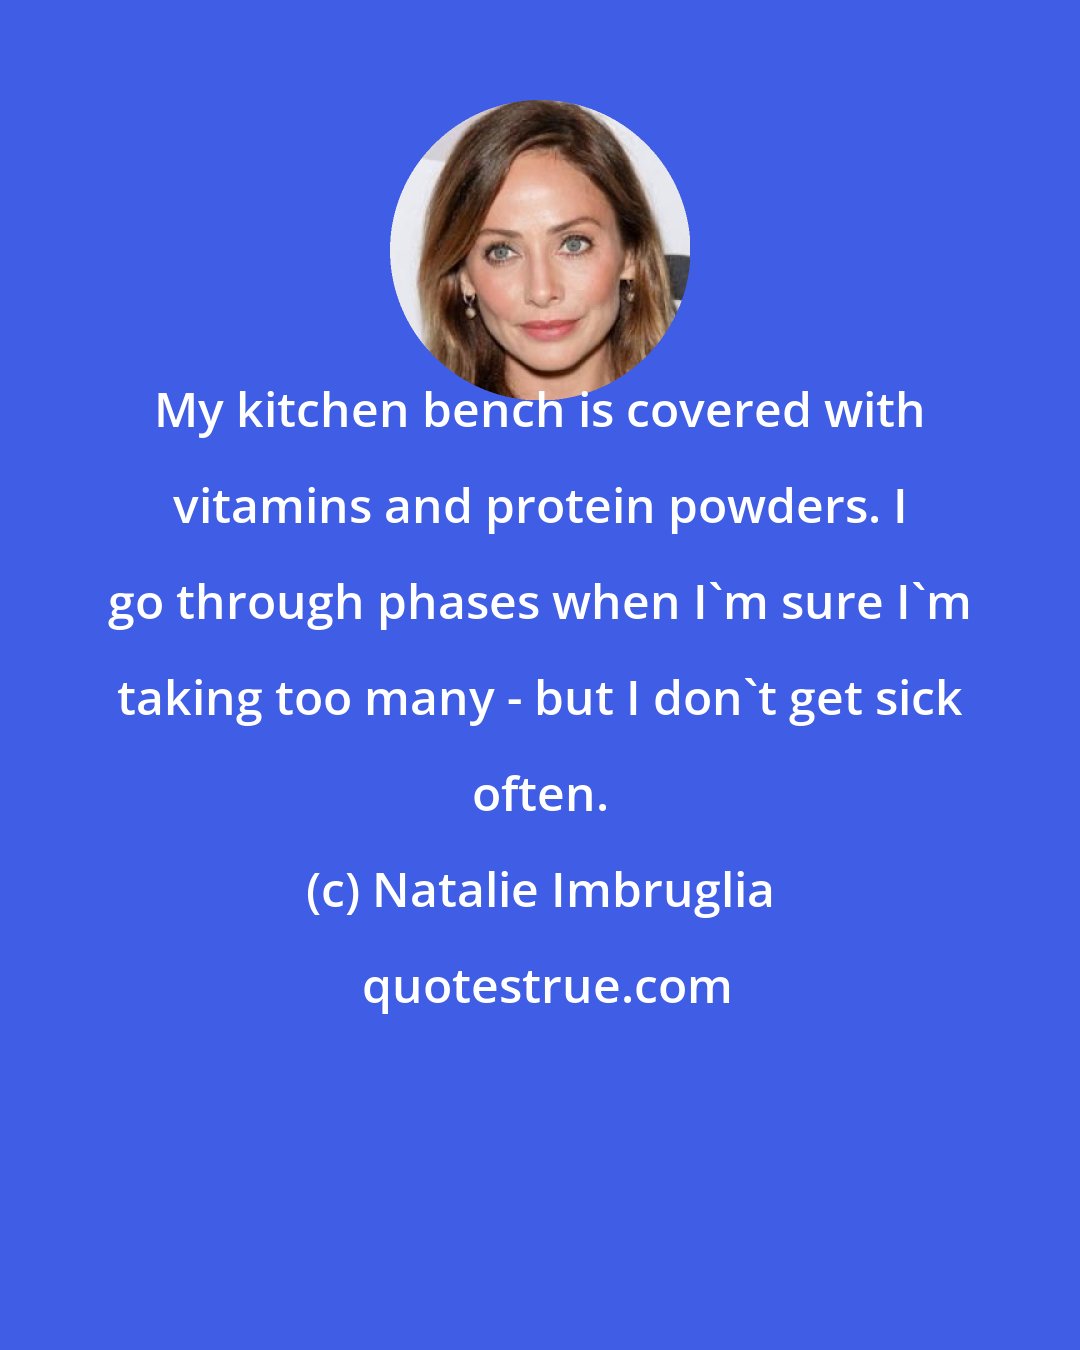 Natalie Imbruglia: My kitchen bench is covered with vitamins and protein powders. I go through phases when I'm sure I'm taking too many - but I don't get sick often.